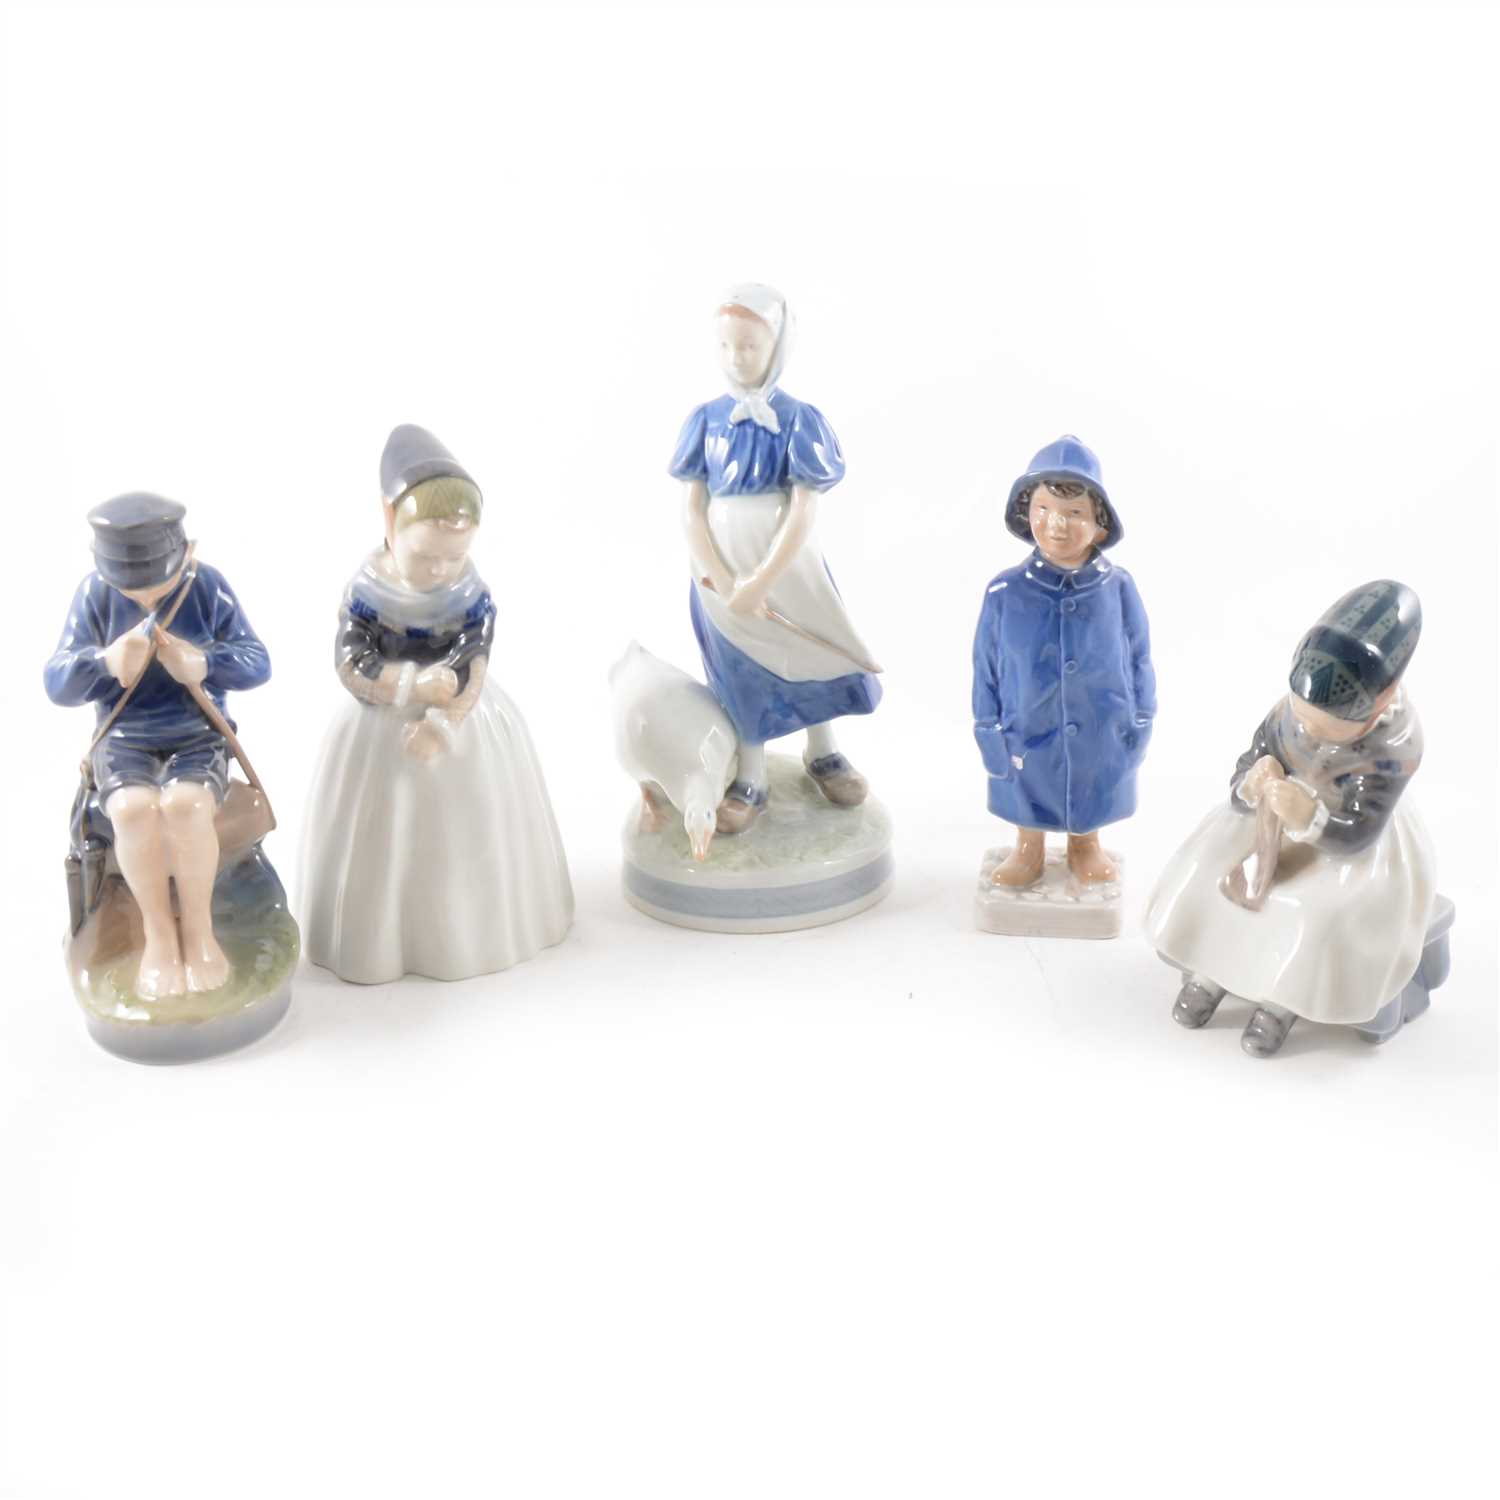 Lot 33 - Royal Copenhagen, figure of a boy in a raincoat no. 532, 18cm; similar figure, no. 3556; together with a collection of Royal Copenhagen and Bring & Grondahl figures, animal models, etc.